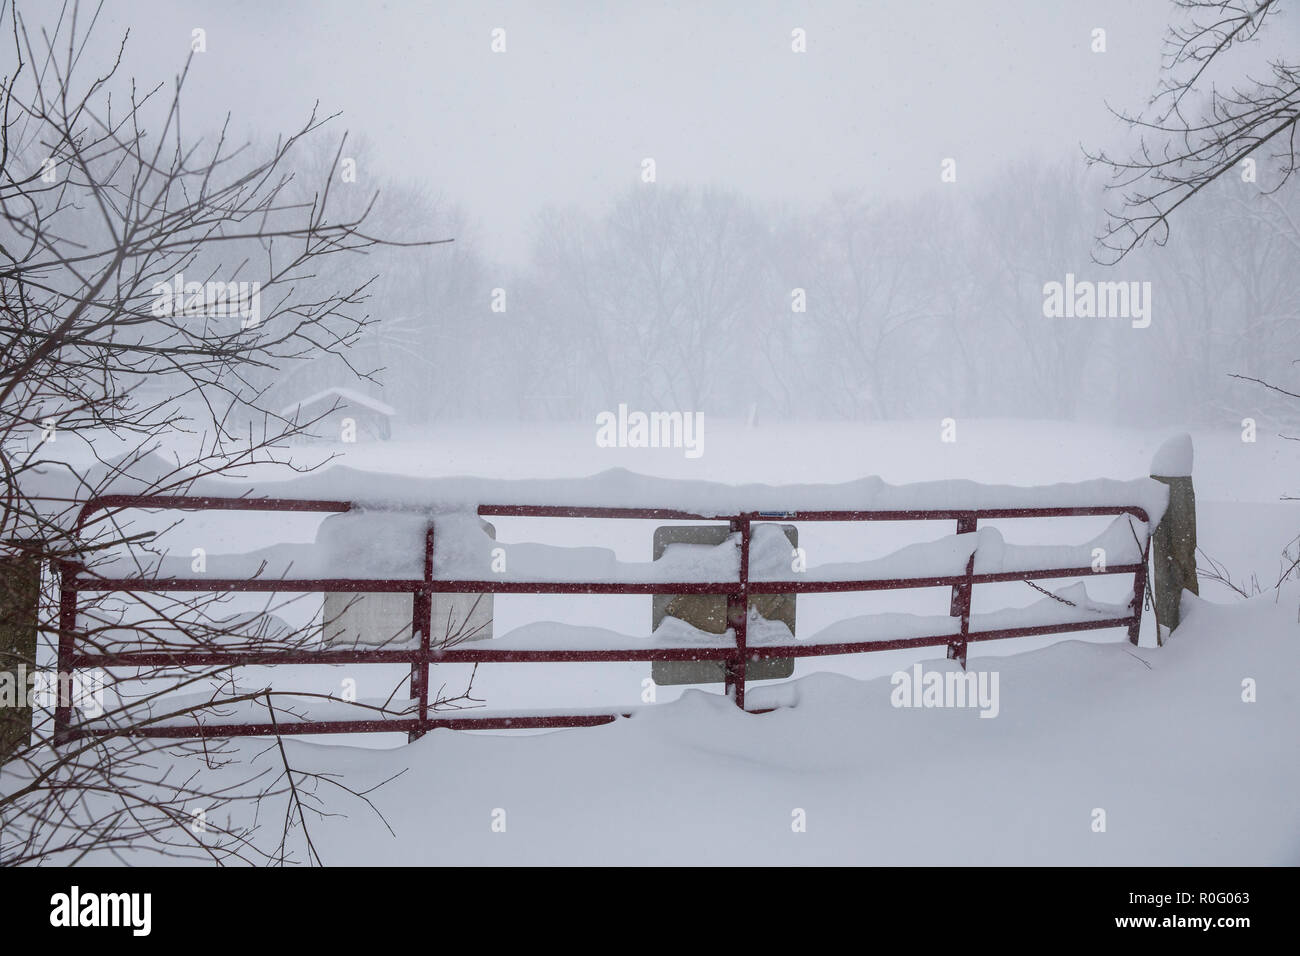 Snow collects on a gate during a blizzard in New York State. Stock Photo